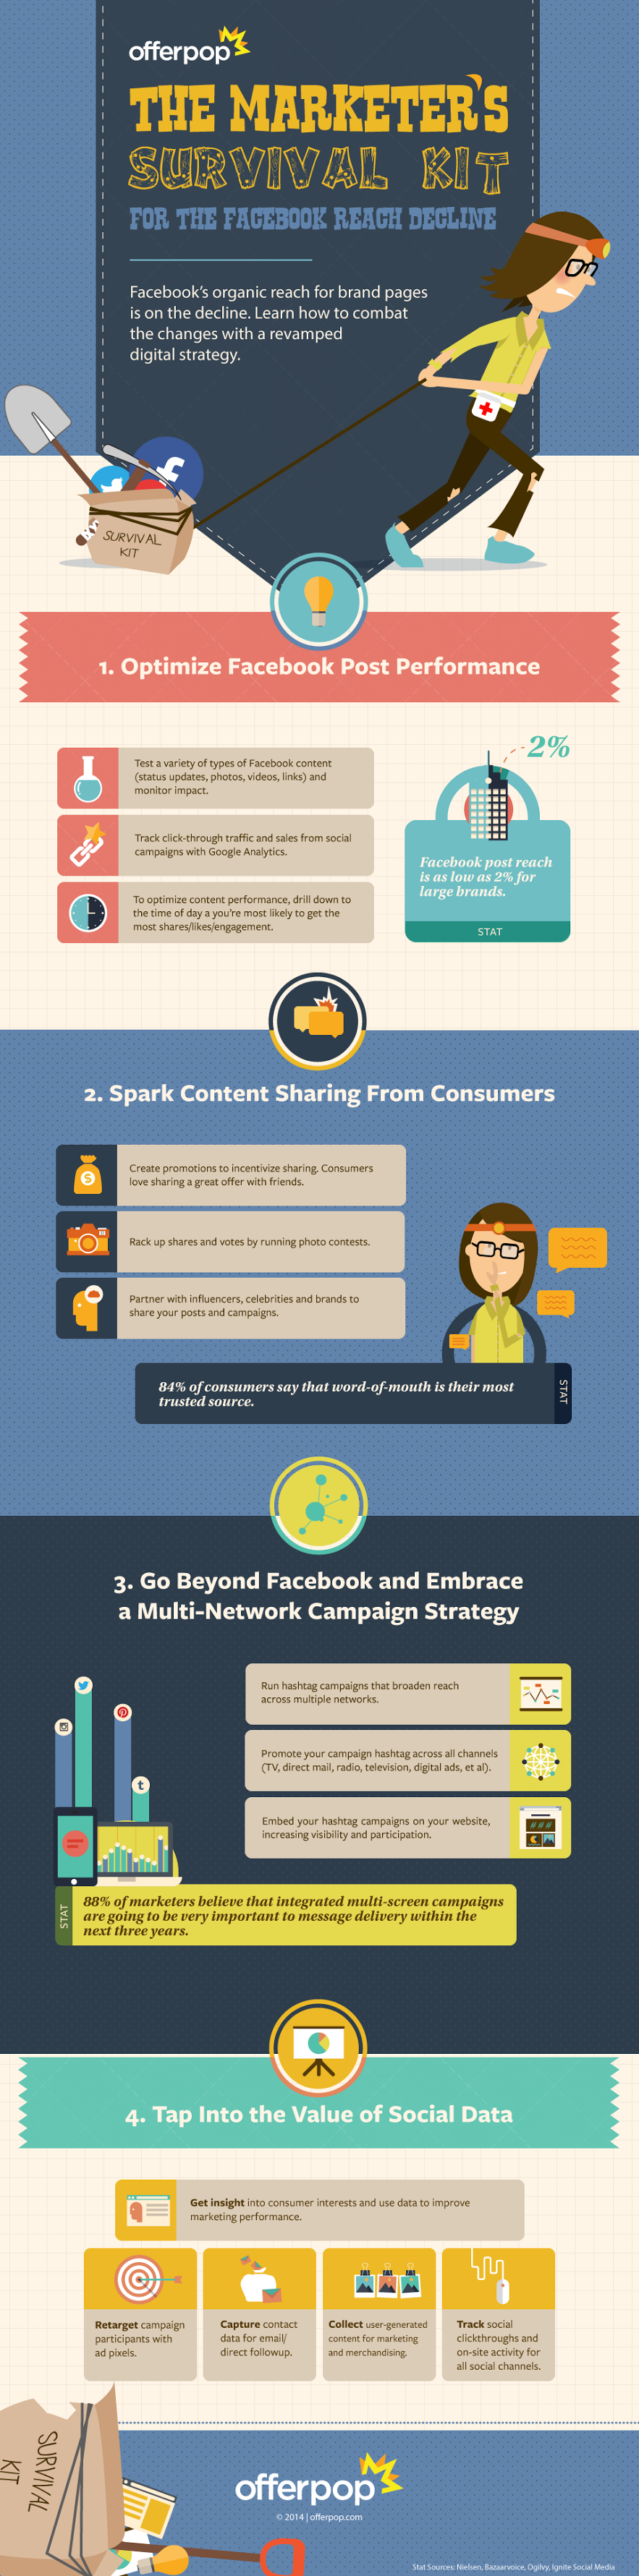 The Four-Step Game Plan to Combat Facebook’s Declining Organic Reach - infographic